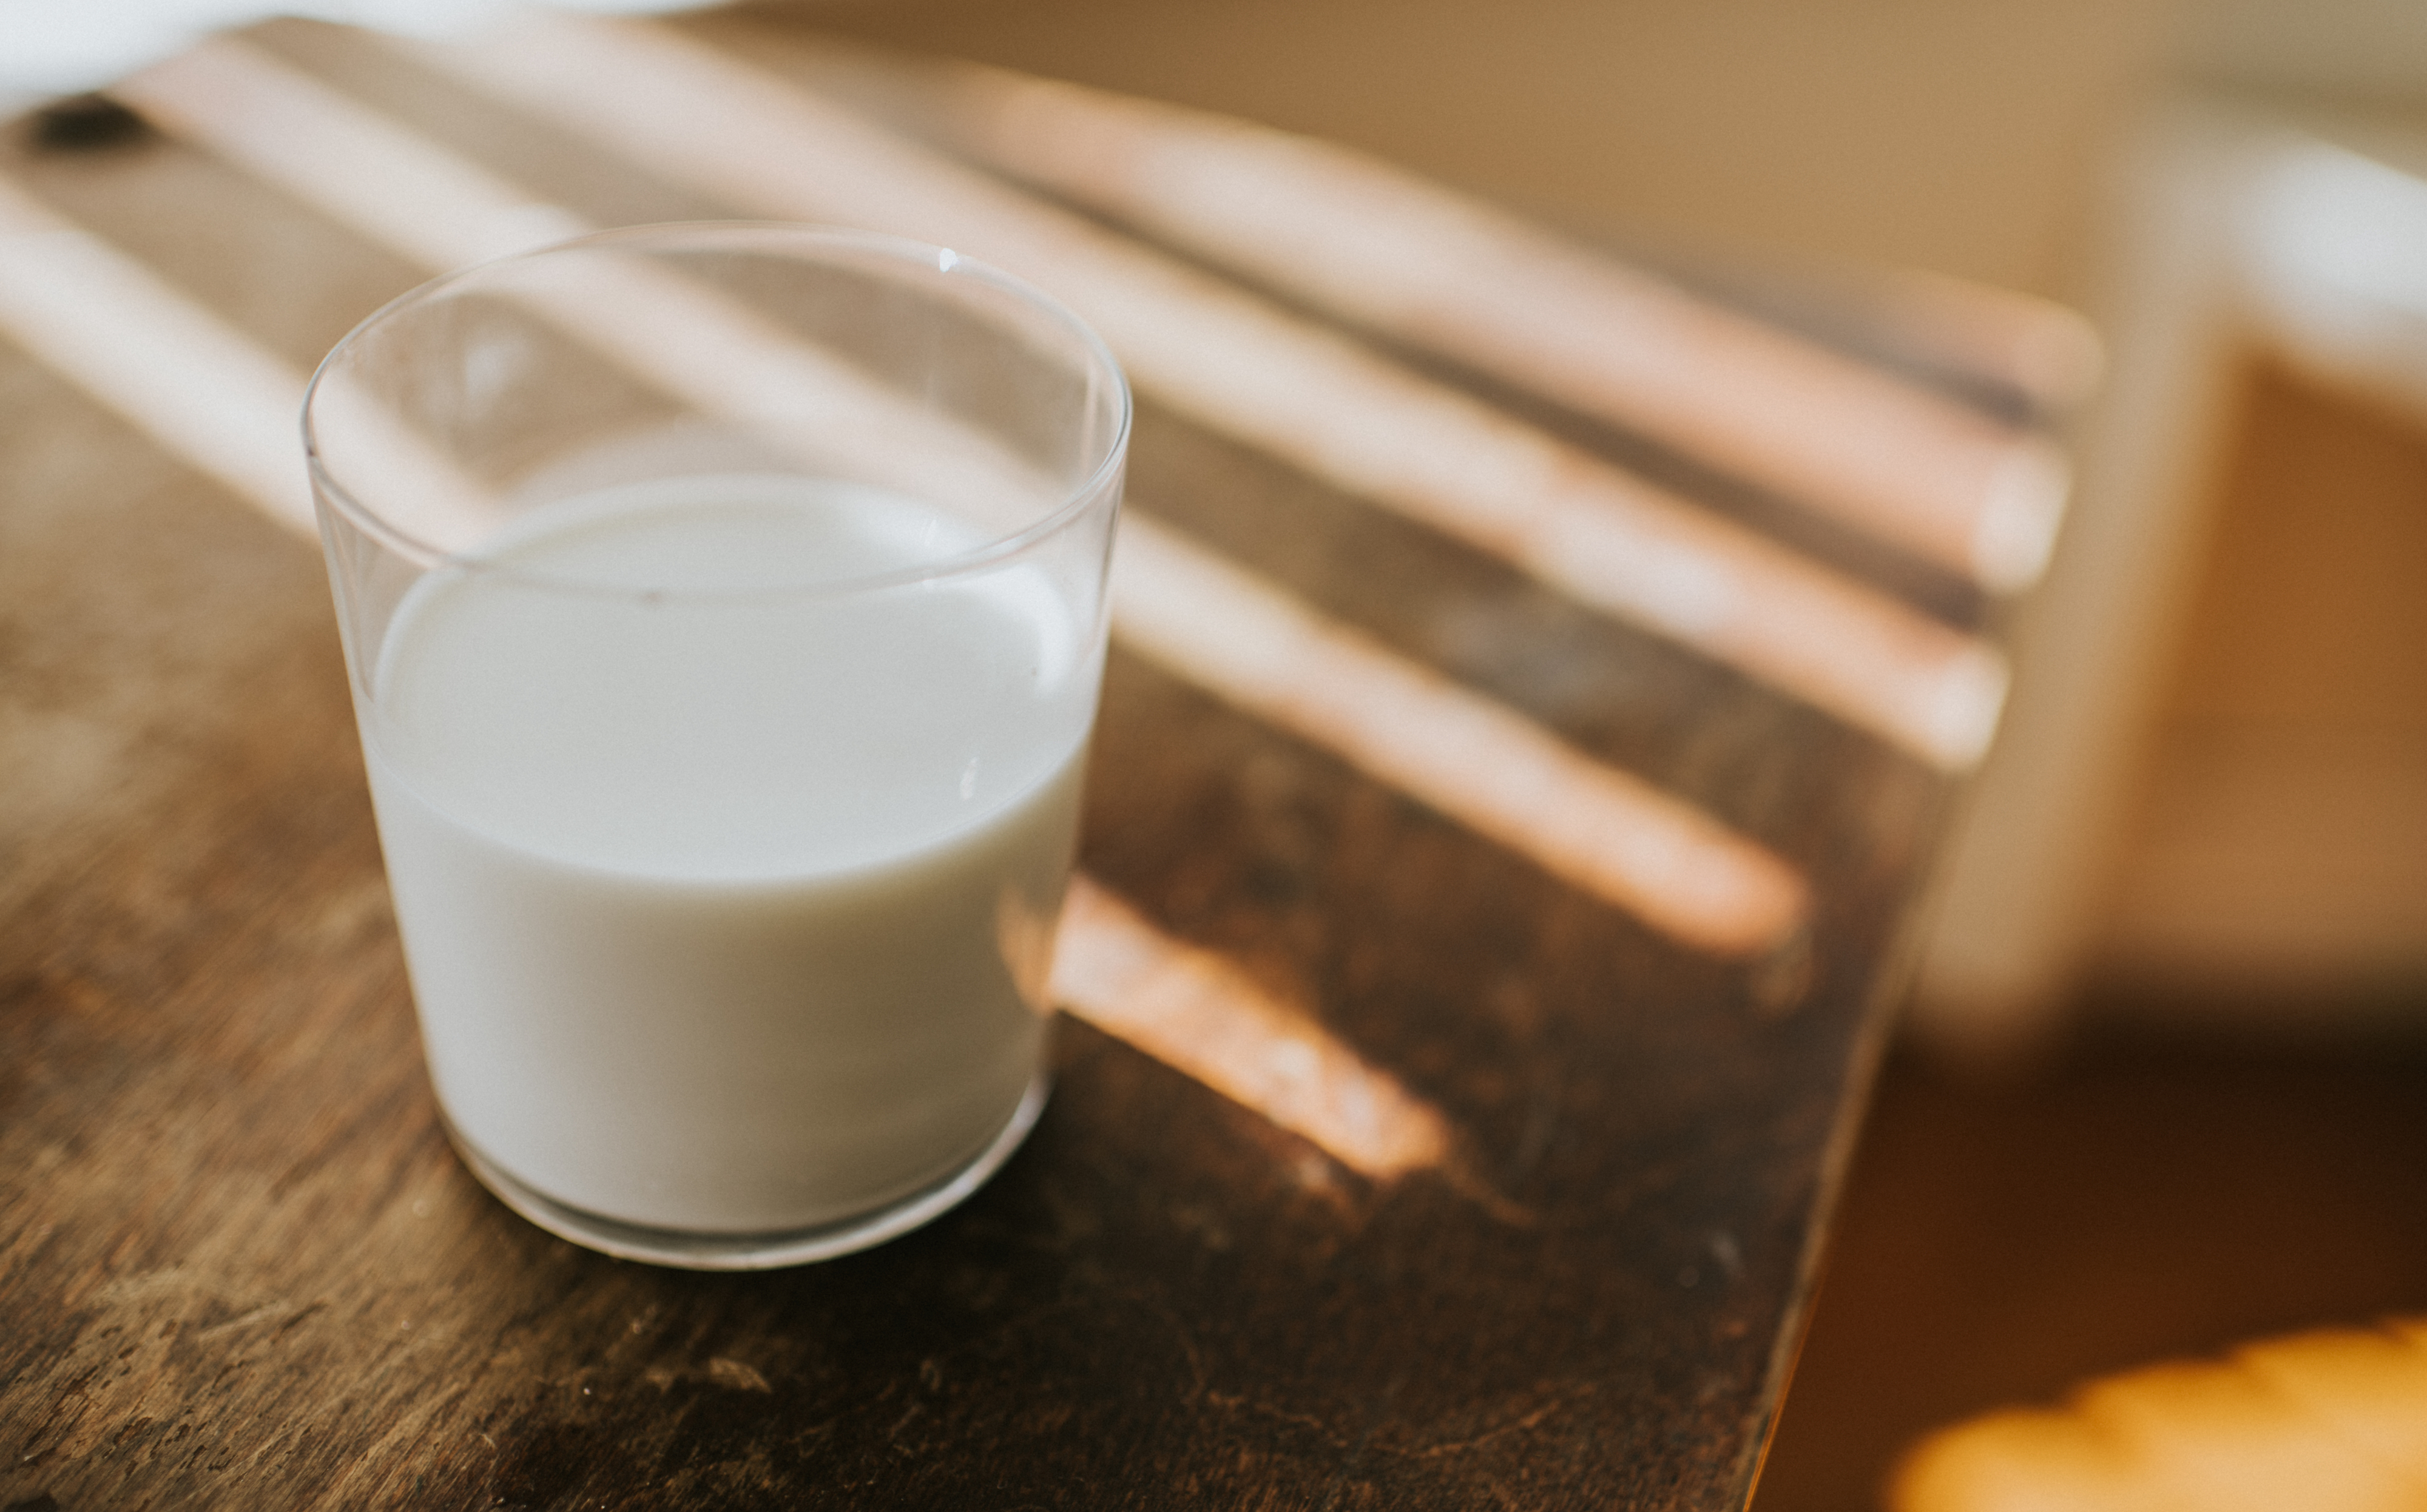 Glass of milk on a wooden table with sunlight casting shadows